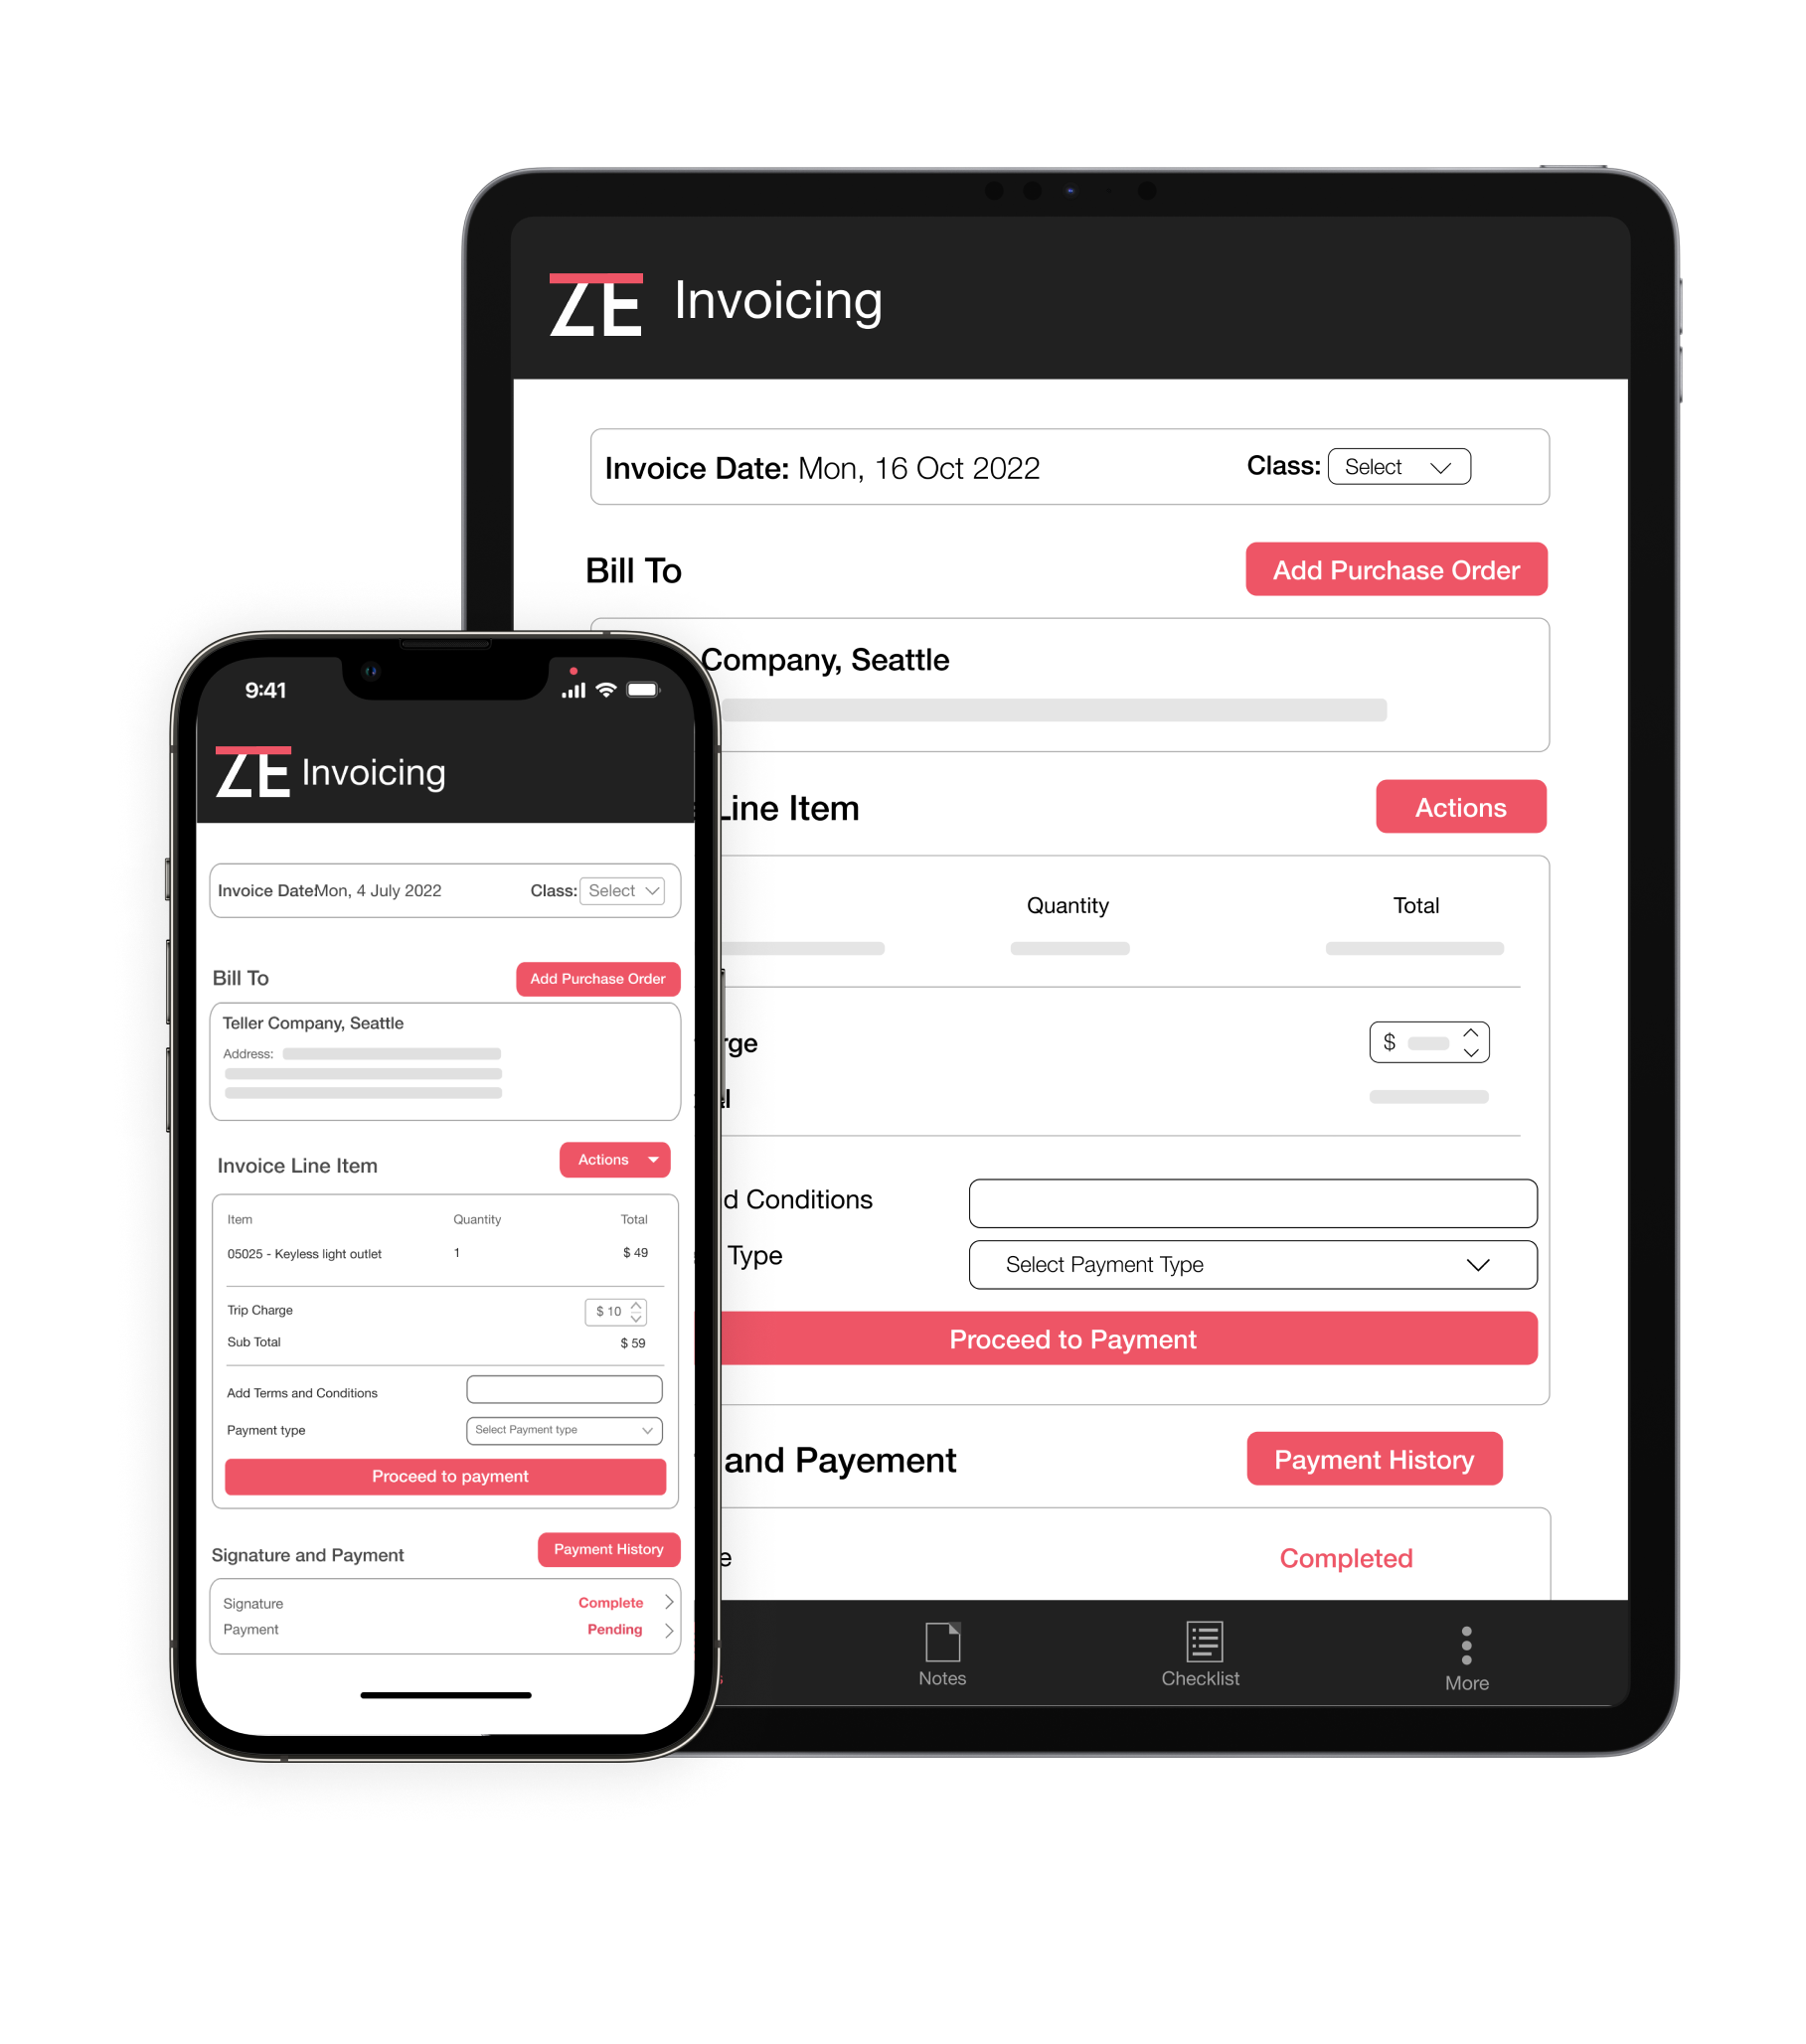 Invoicing
Impress your customers with ZenElectrical’s digital and customizable invoicing software. Streamline and automate tasks to increase profitability with accurate, professional, easy-to-make service invoices.